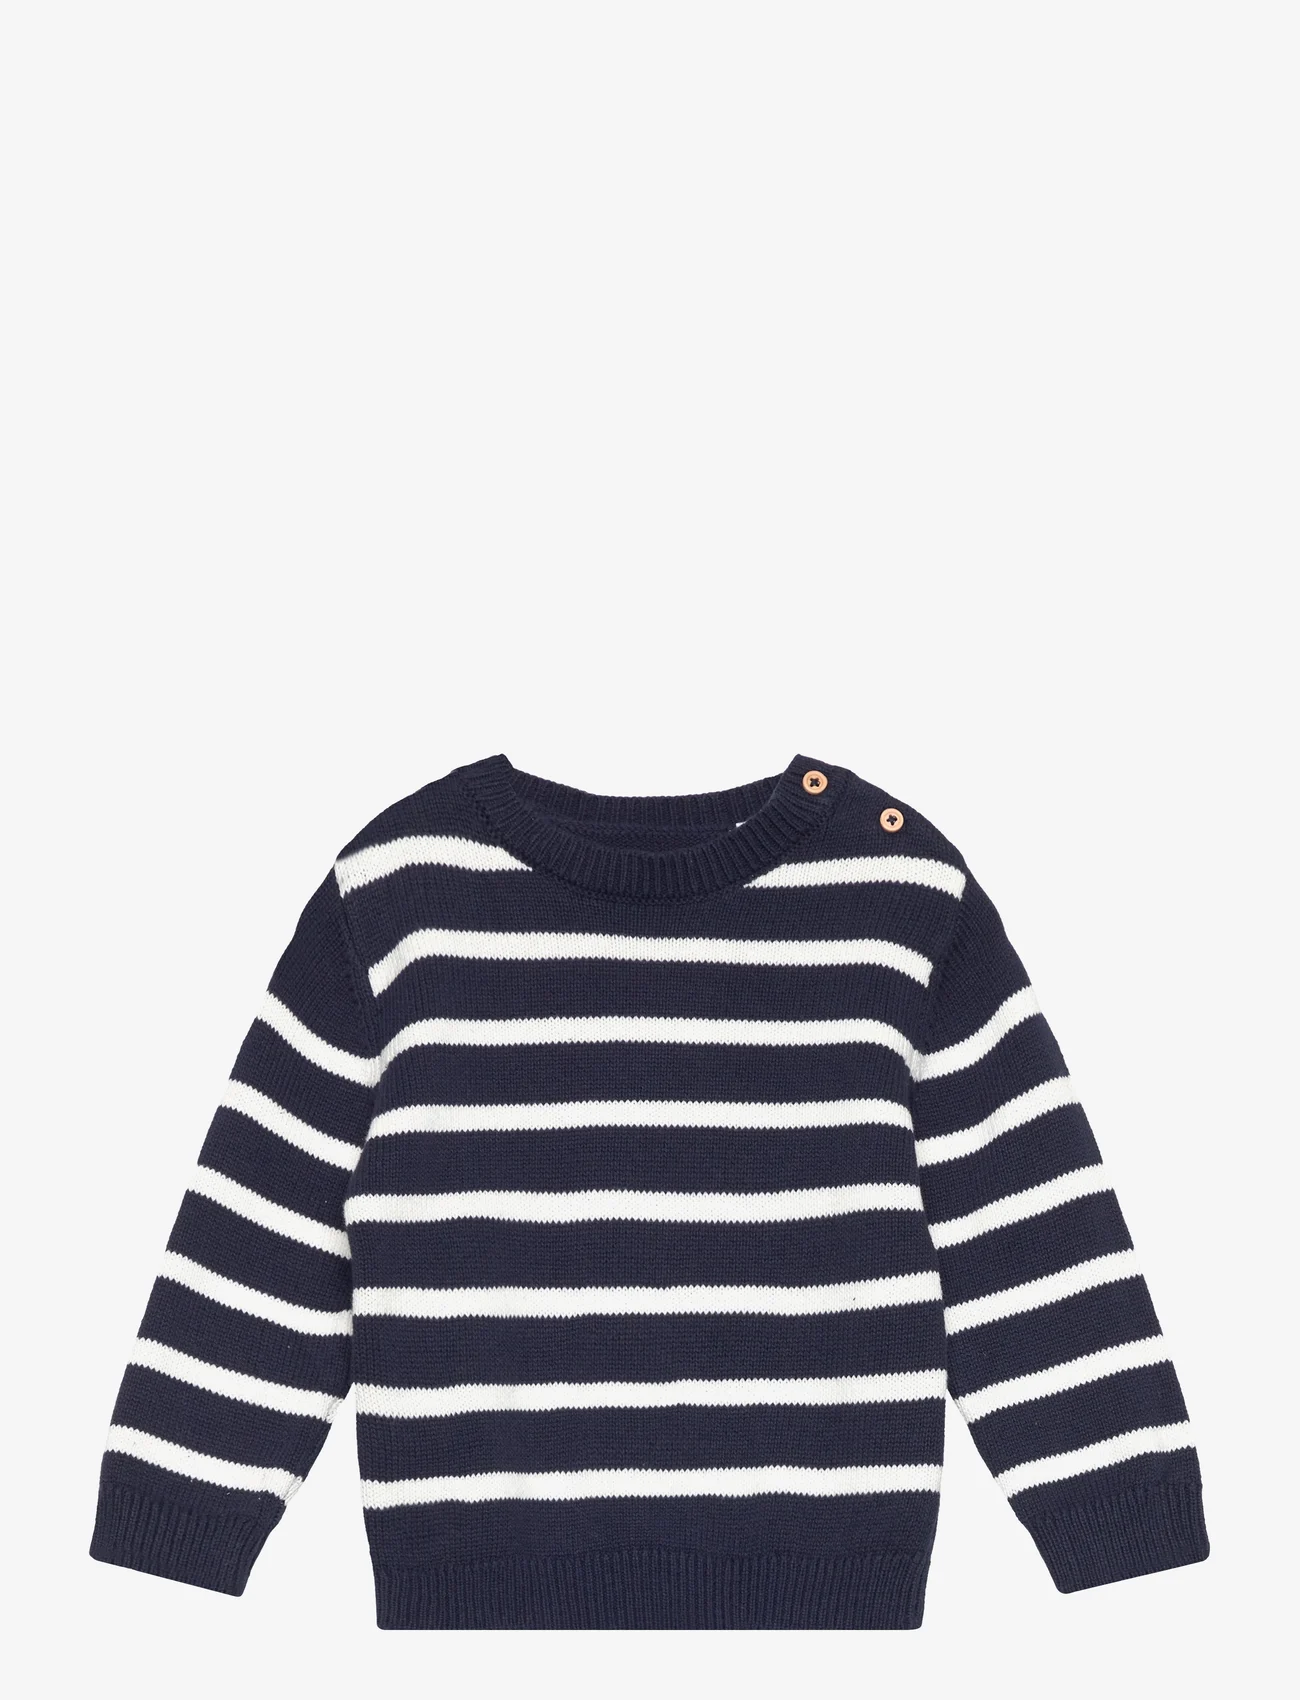 Mango - Striped knit sweater - pullover - navy - 0